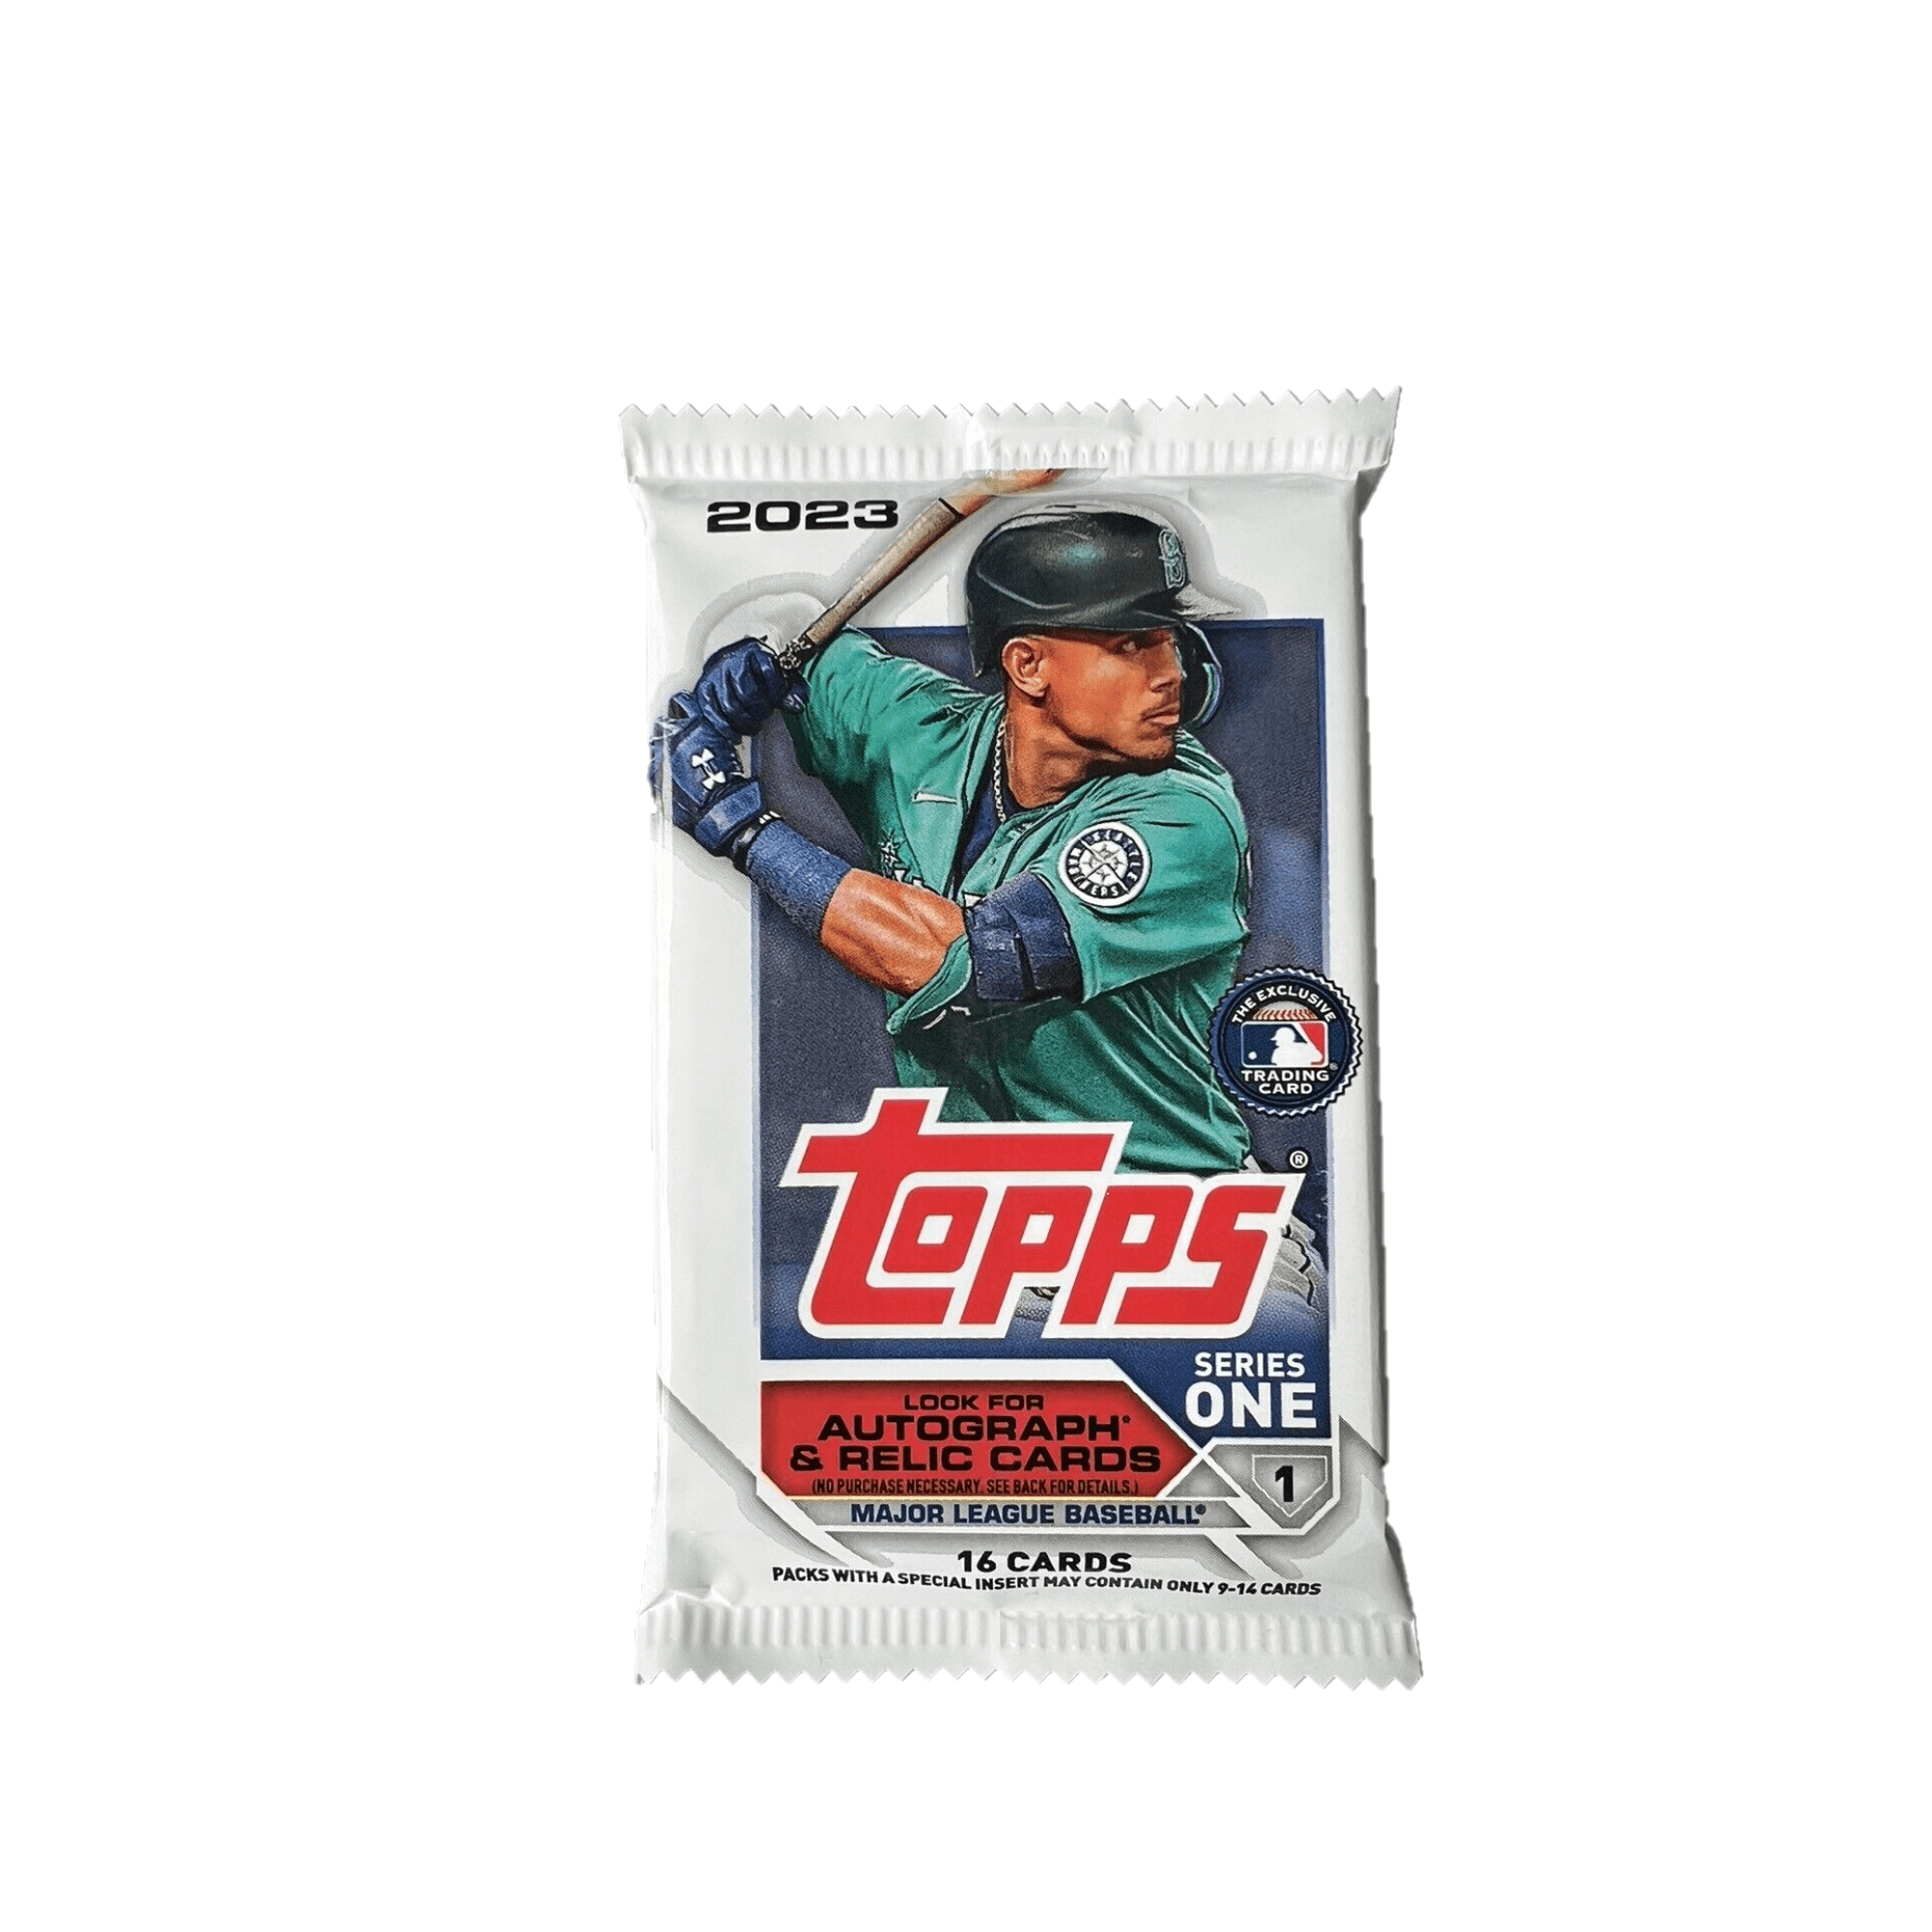 Amazoncom  Topps 2023 Series 1 Baseball MLB Set of 3 Packs  16 Cards per  Pack  48 Trading Cards Total  Sports  Outdoors